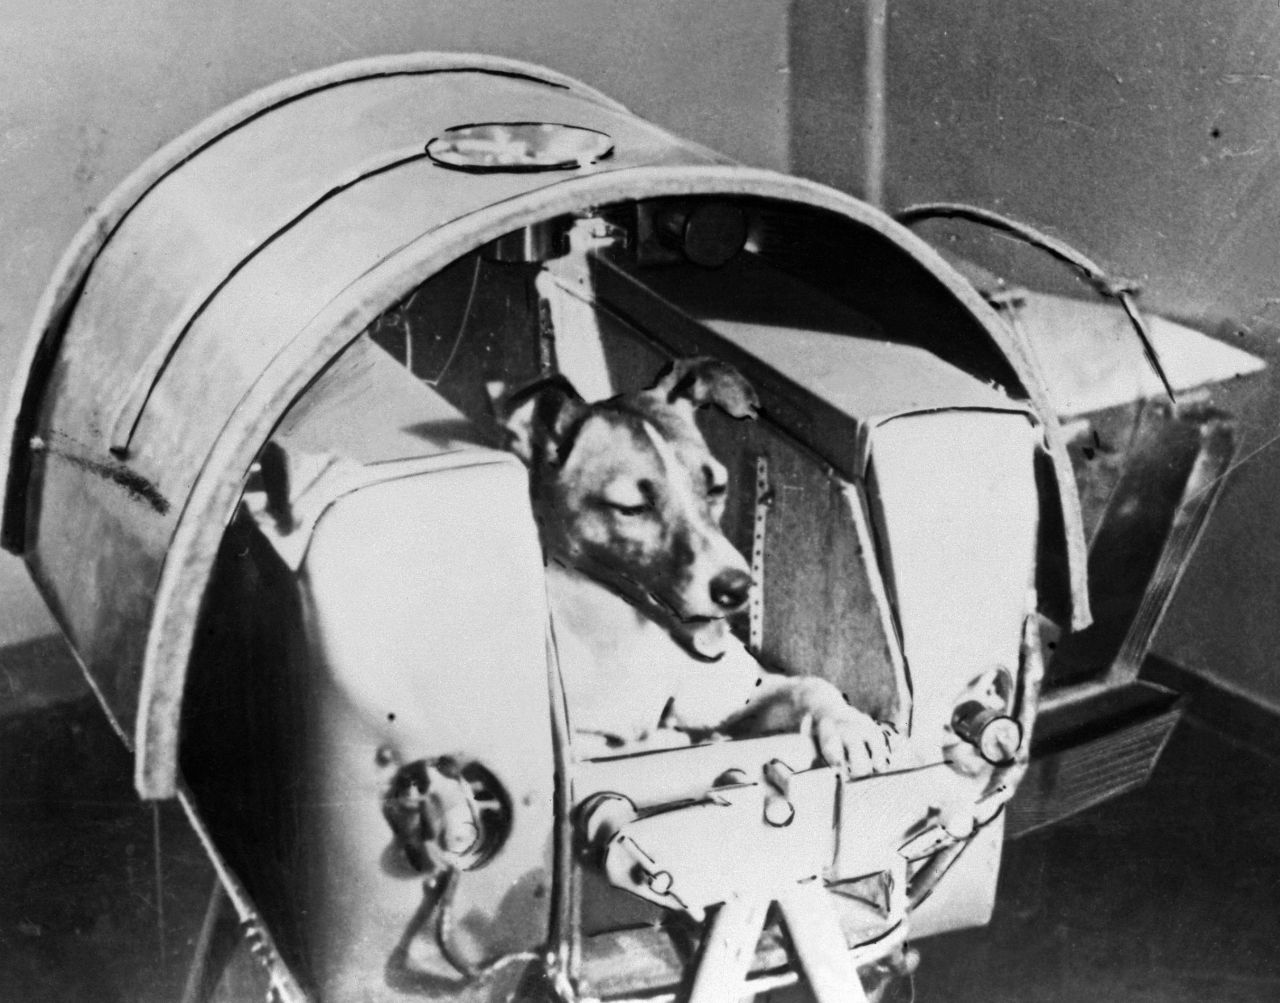 Laika the dog is pictured aboard Sputnik II on November 13, 1957. She was the first animal to orbit the Earth. She did not survive her trip, but the mission provided valuable data that paved the way for the first human in space.